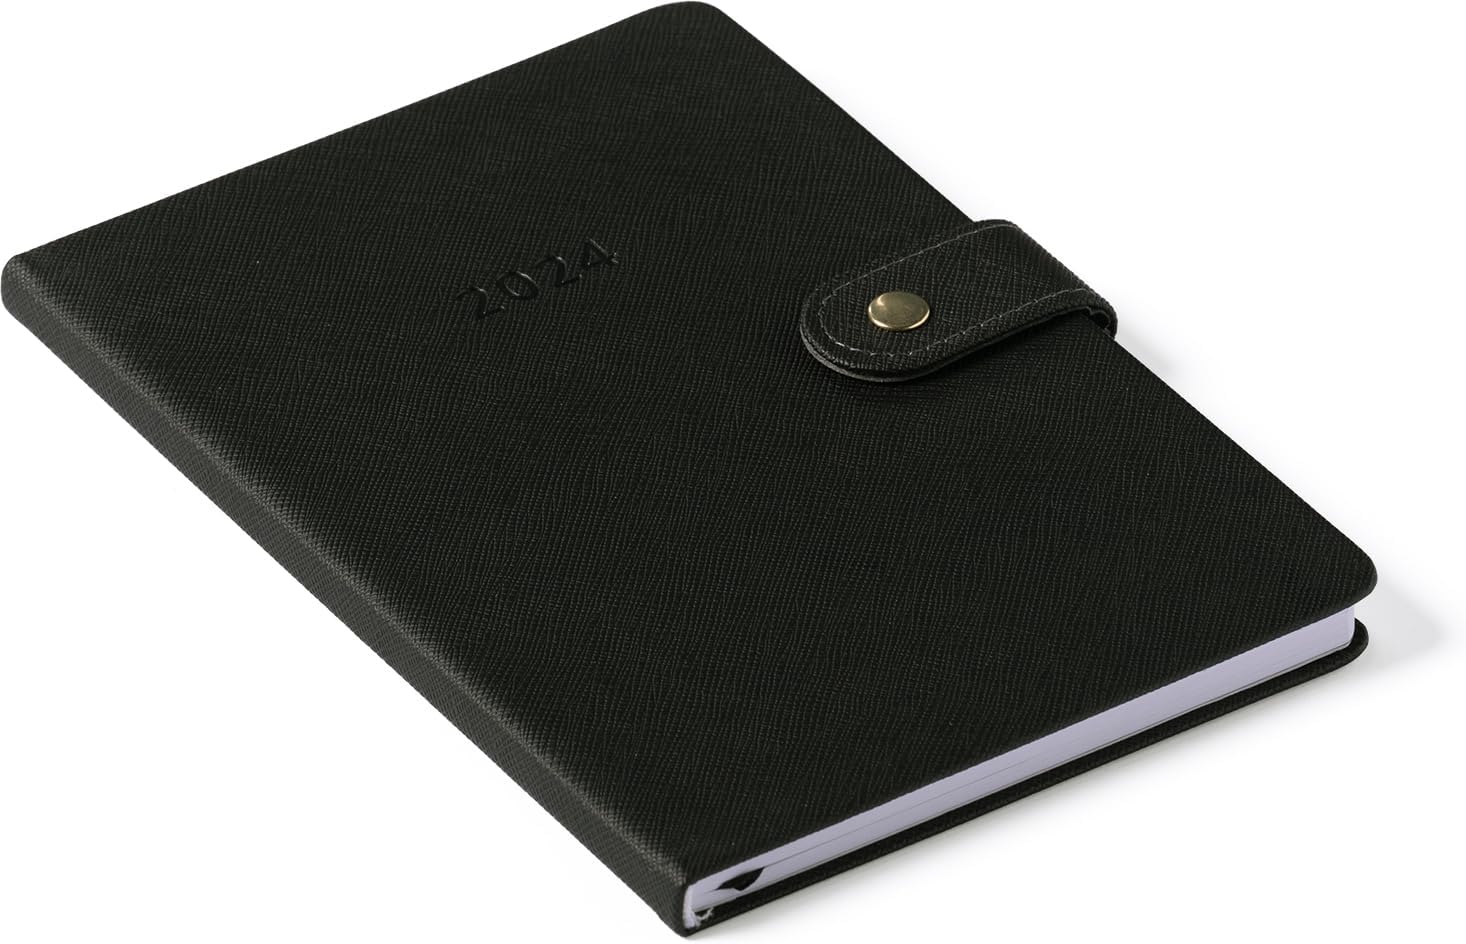 2024 Black with Tab Closure 6x8 Bound Planner